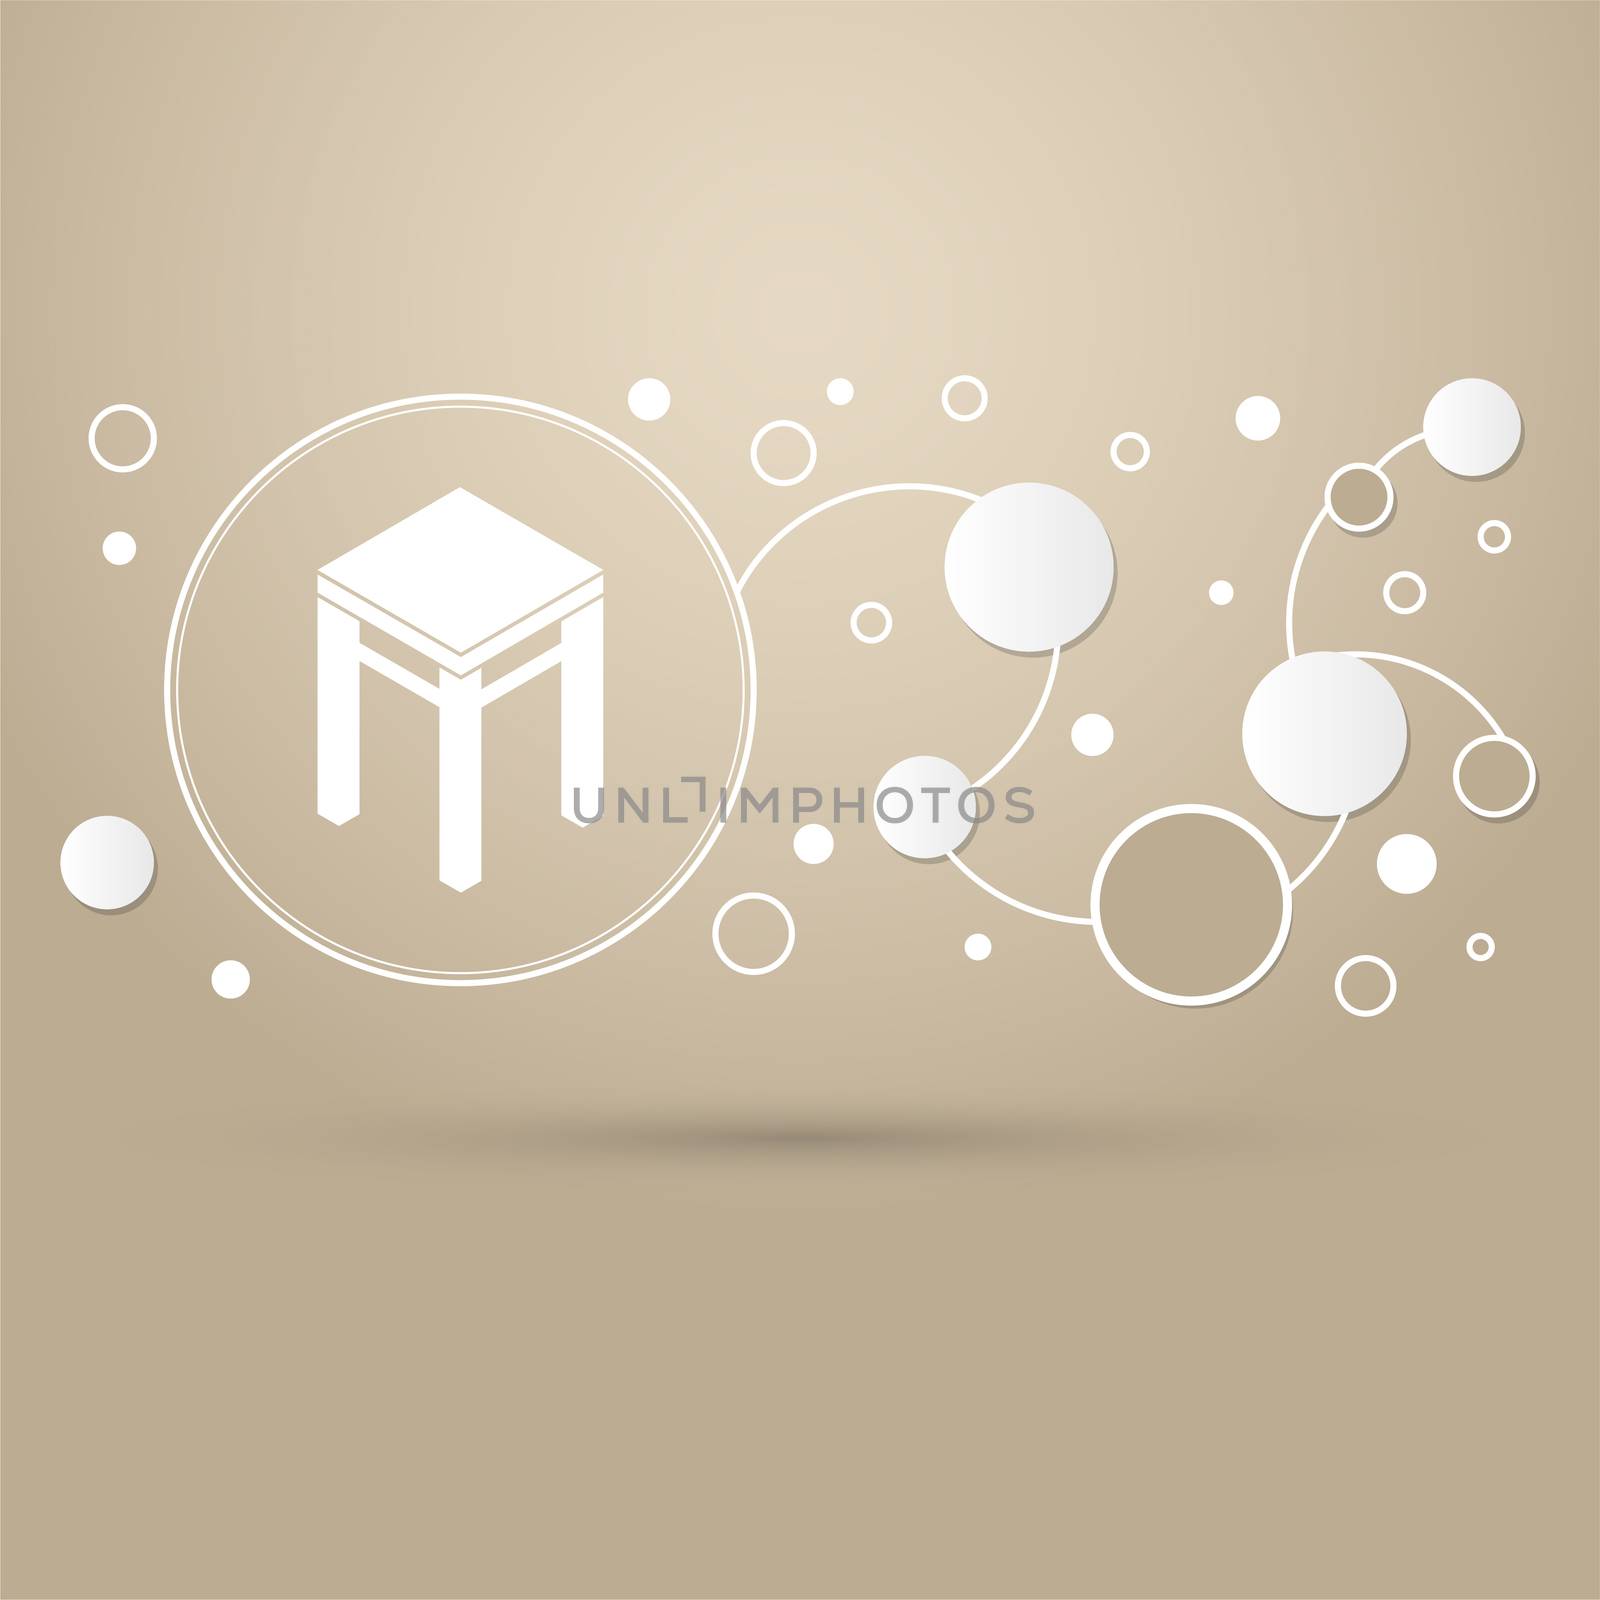 Stool icons on a brown background with elegant style and modern design infographic.  by Adamchuk